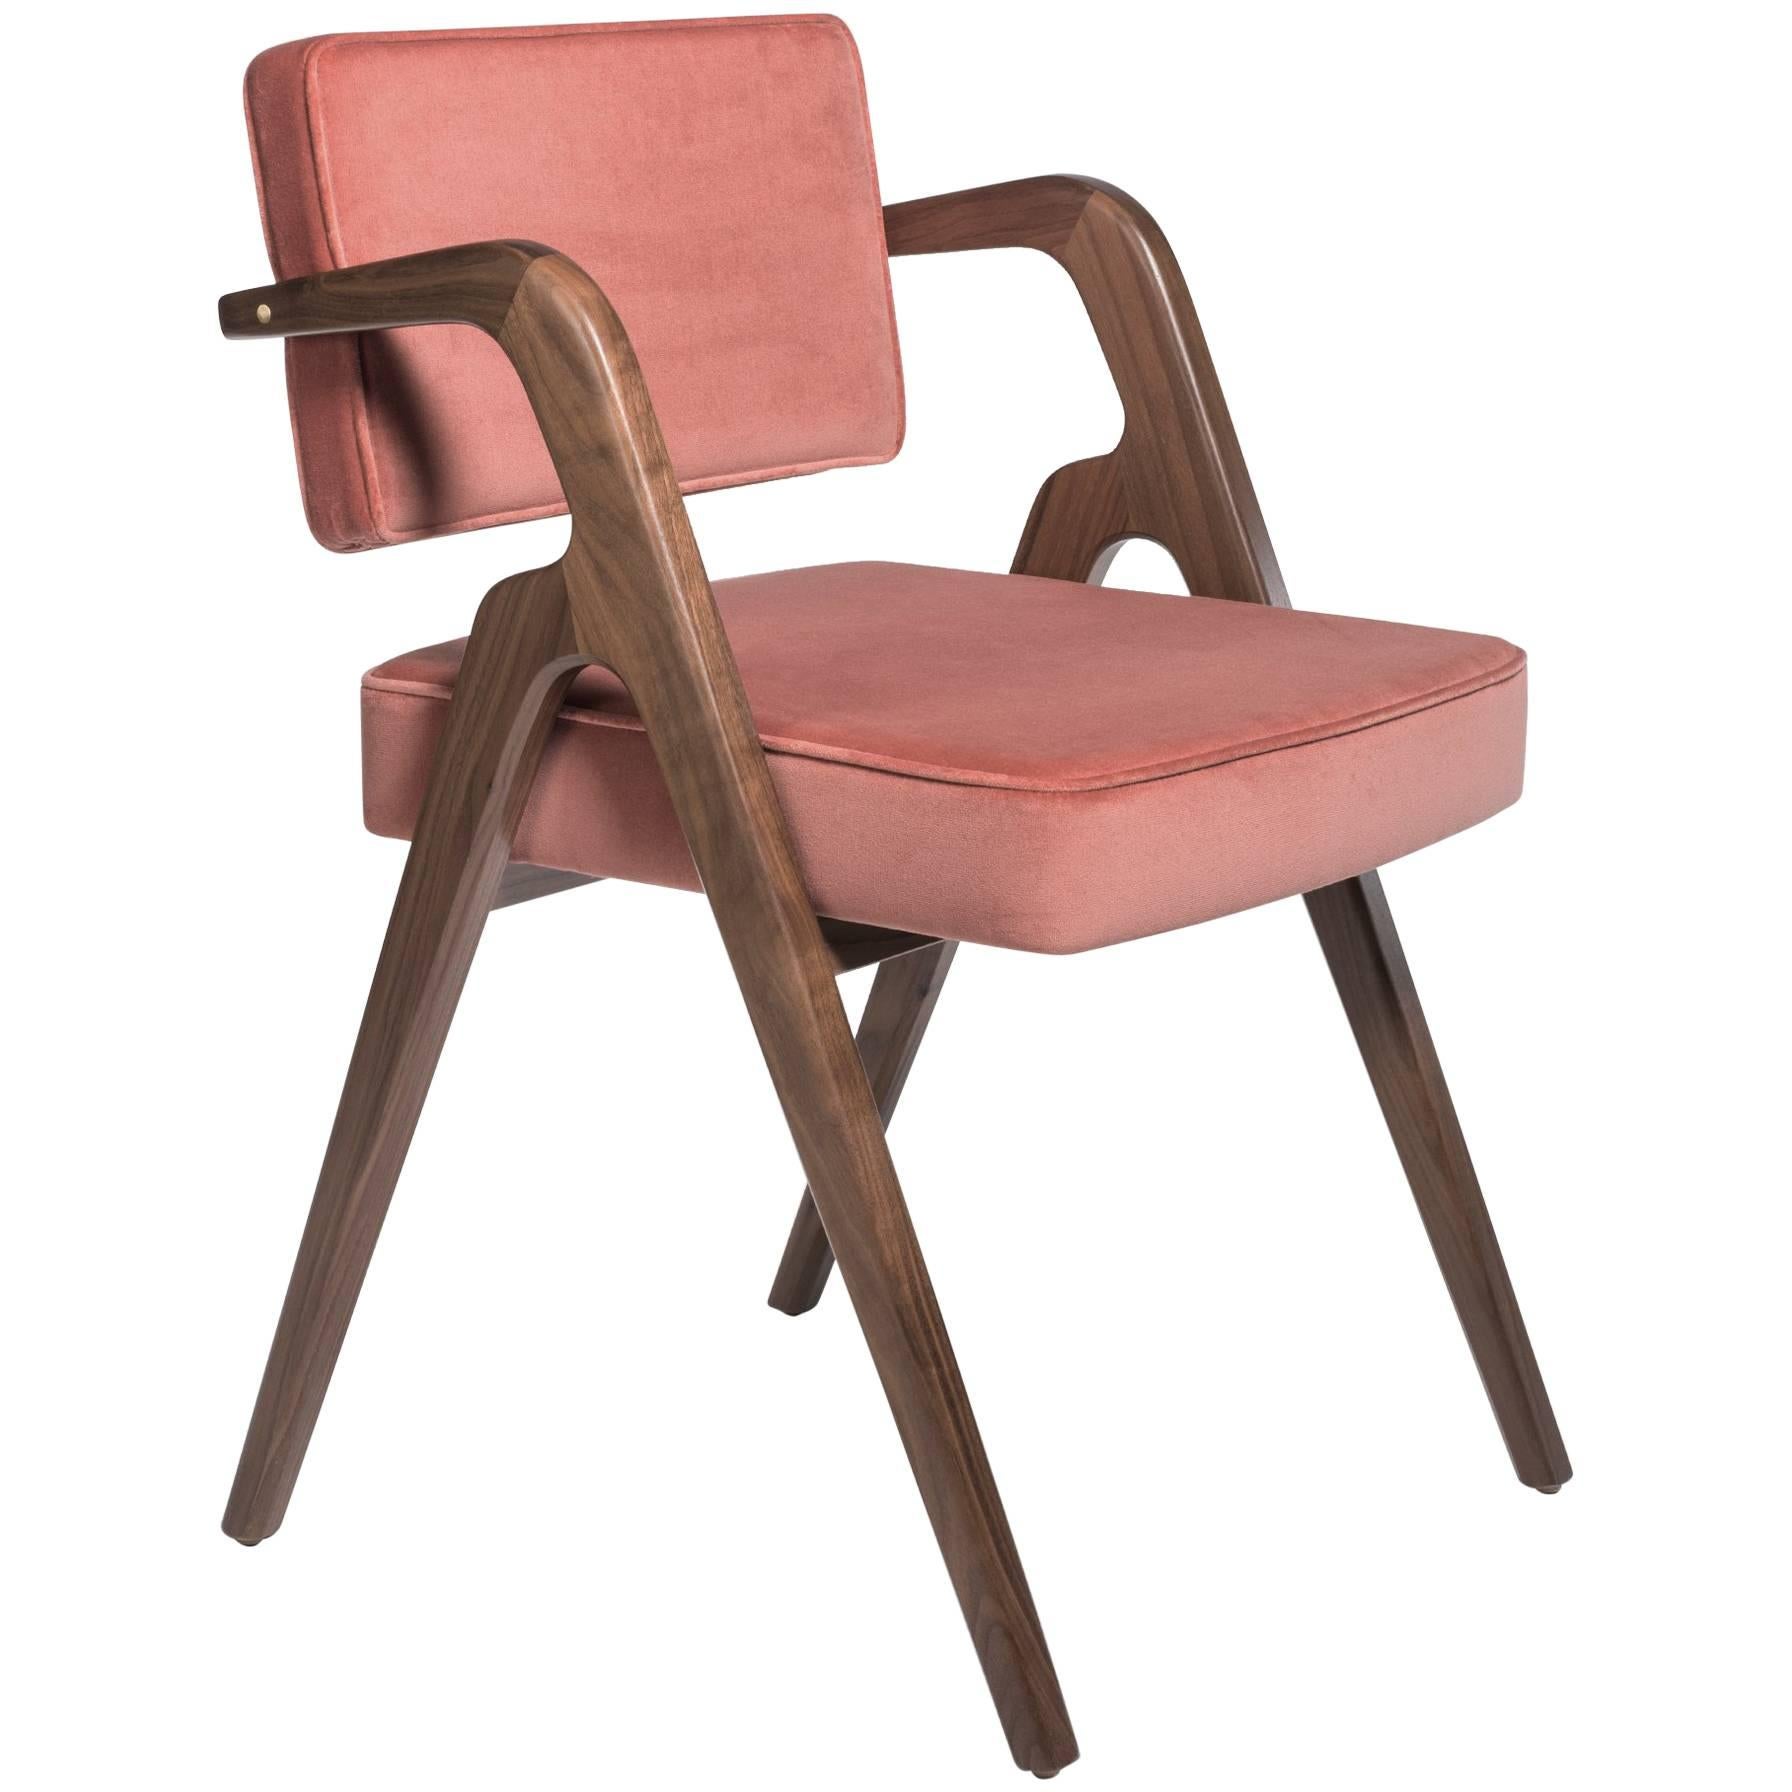 Walnut and Pink Velvet Contemporary Dining Chair by LUTECA, Made to Order